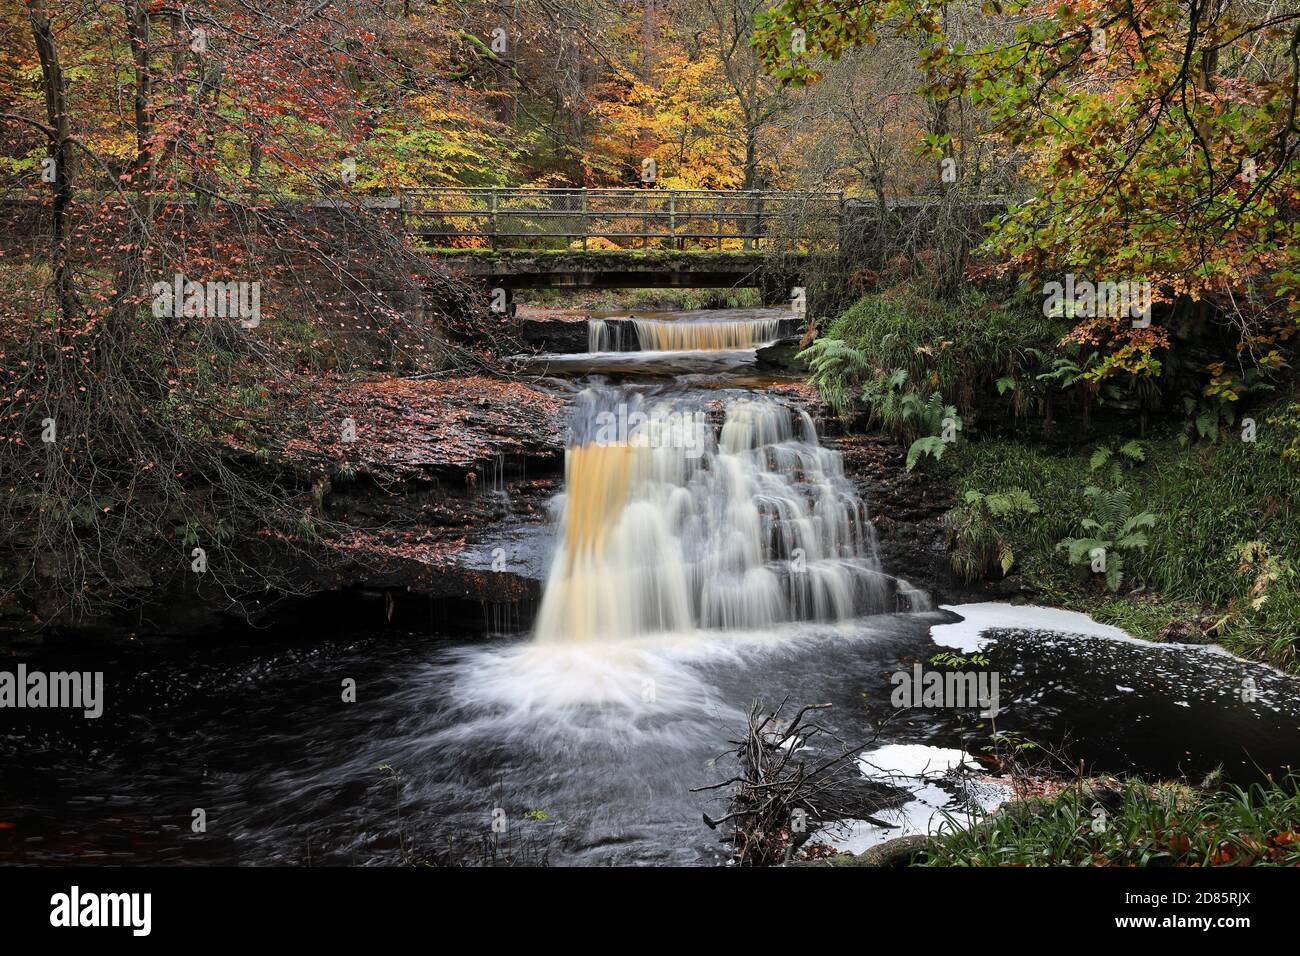 Blackling Hole Waterfall in Autumn, Hamsterley Forest, Teesdale, County Durham, UK Stock Photo